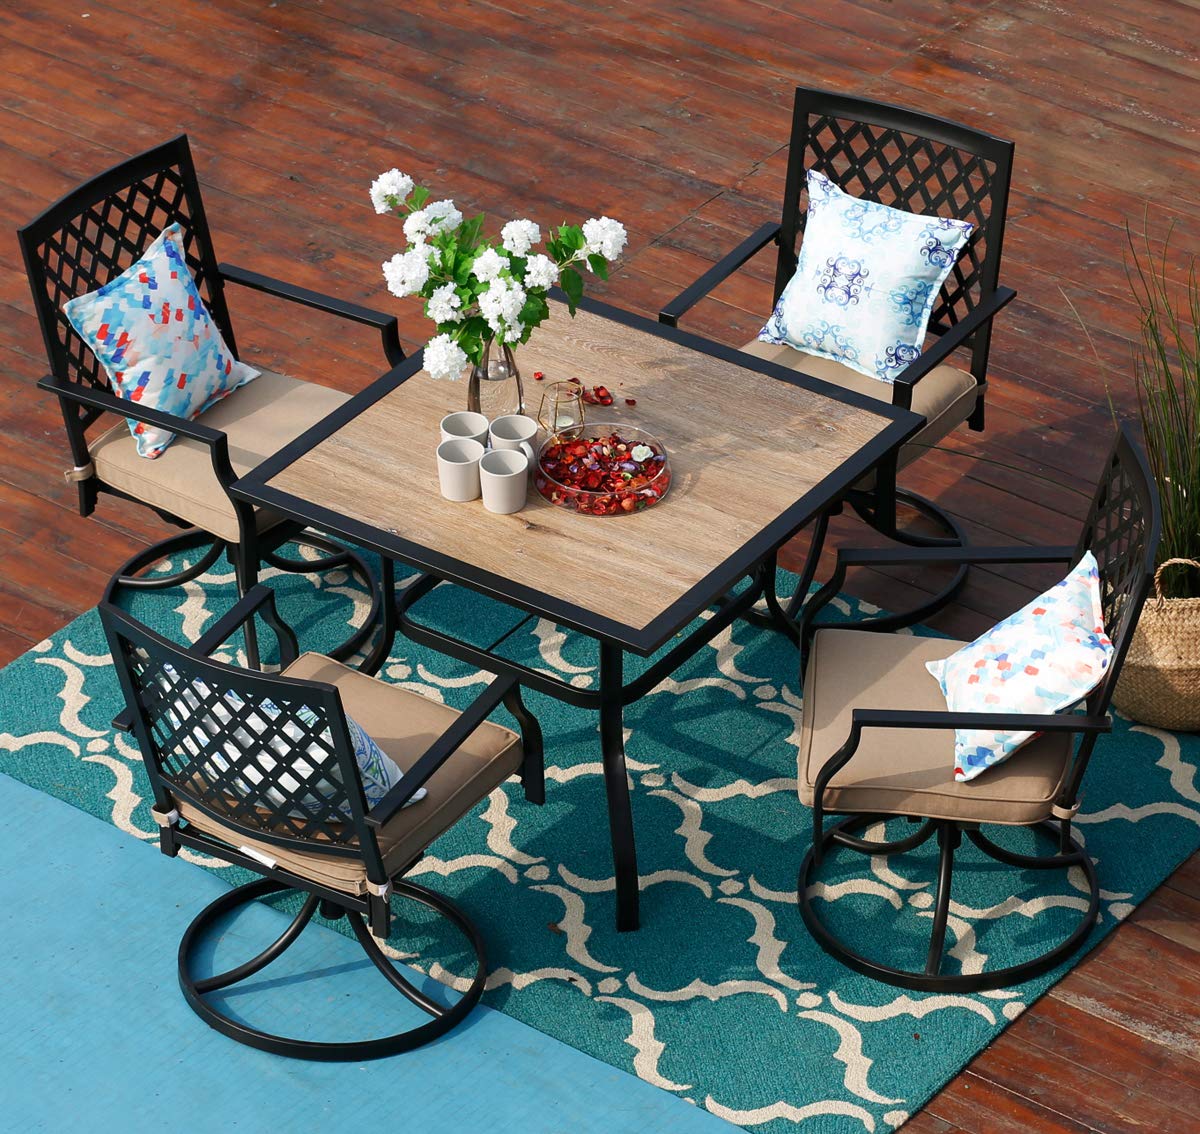 MF Studio Bistro 5 Piece Patio Dining Set with 4 Swivel Chairs and table